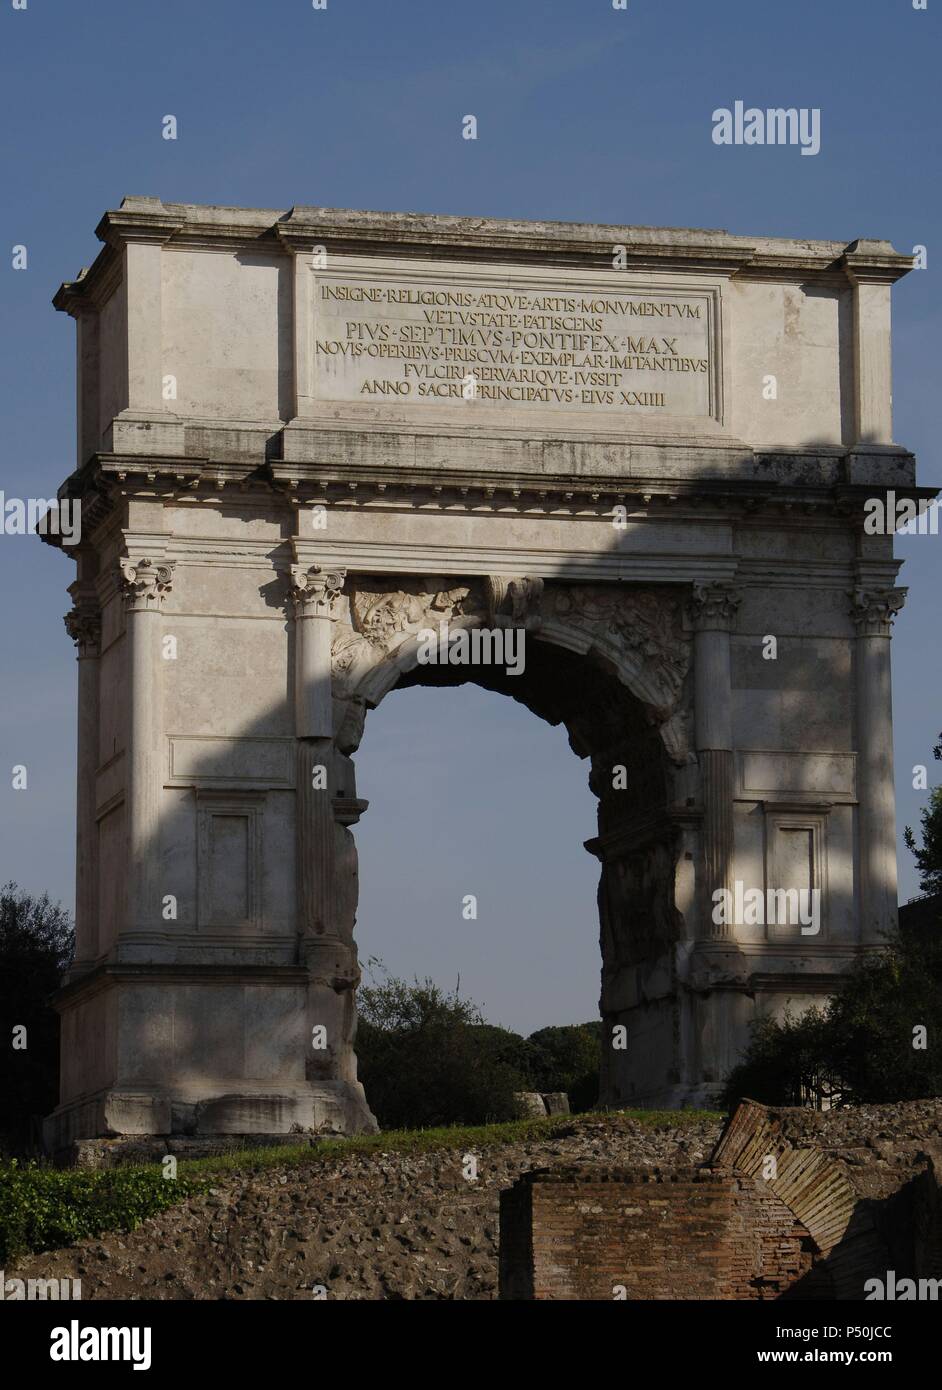 Roman Art. Arch of Titus. Erected in the year 81 to commemorate the conquest of Titus against the Jews. It features carved scenes of the conquest and subsequent destruction of Jerusalem (AD 70). Via Sacra. Roman Forum. Rome. Italy. Stock Photo